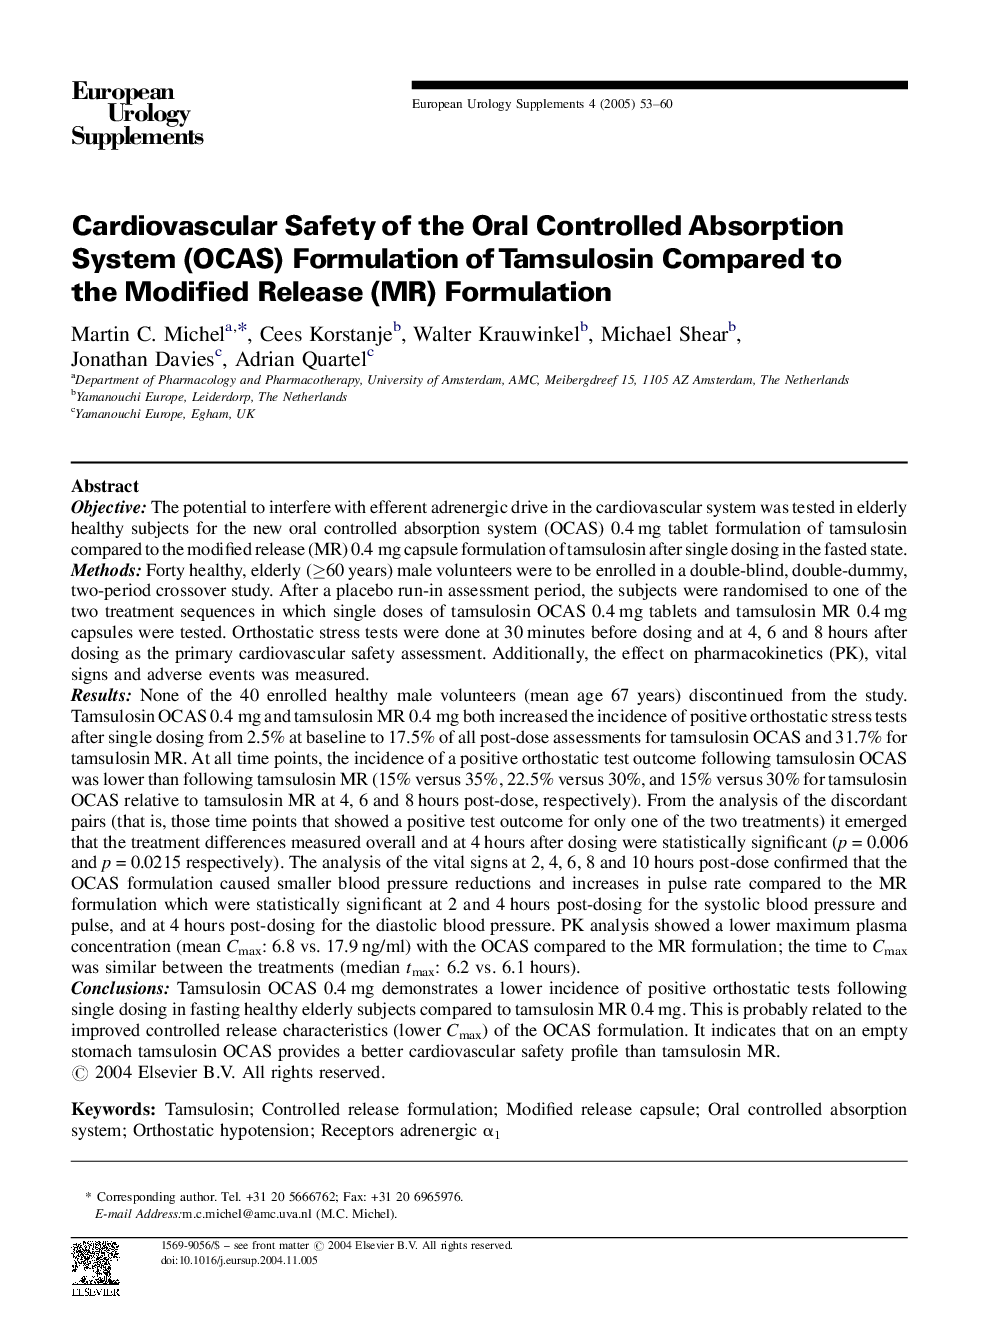 Cardiovascular Safety of the Oral Controlled Absorption System (OCAS) Formulation of Tamsulosin Compared to the Modified Release (MR) Formulation